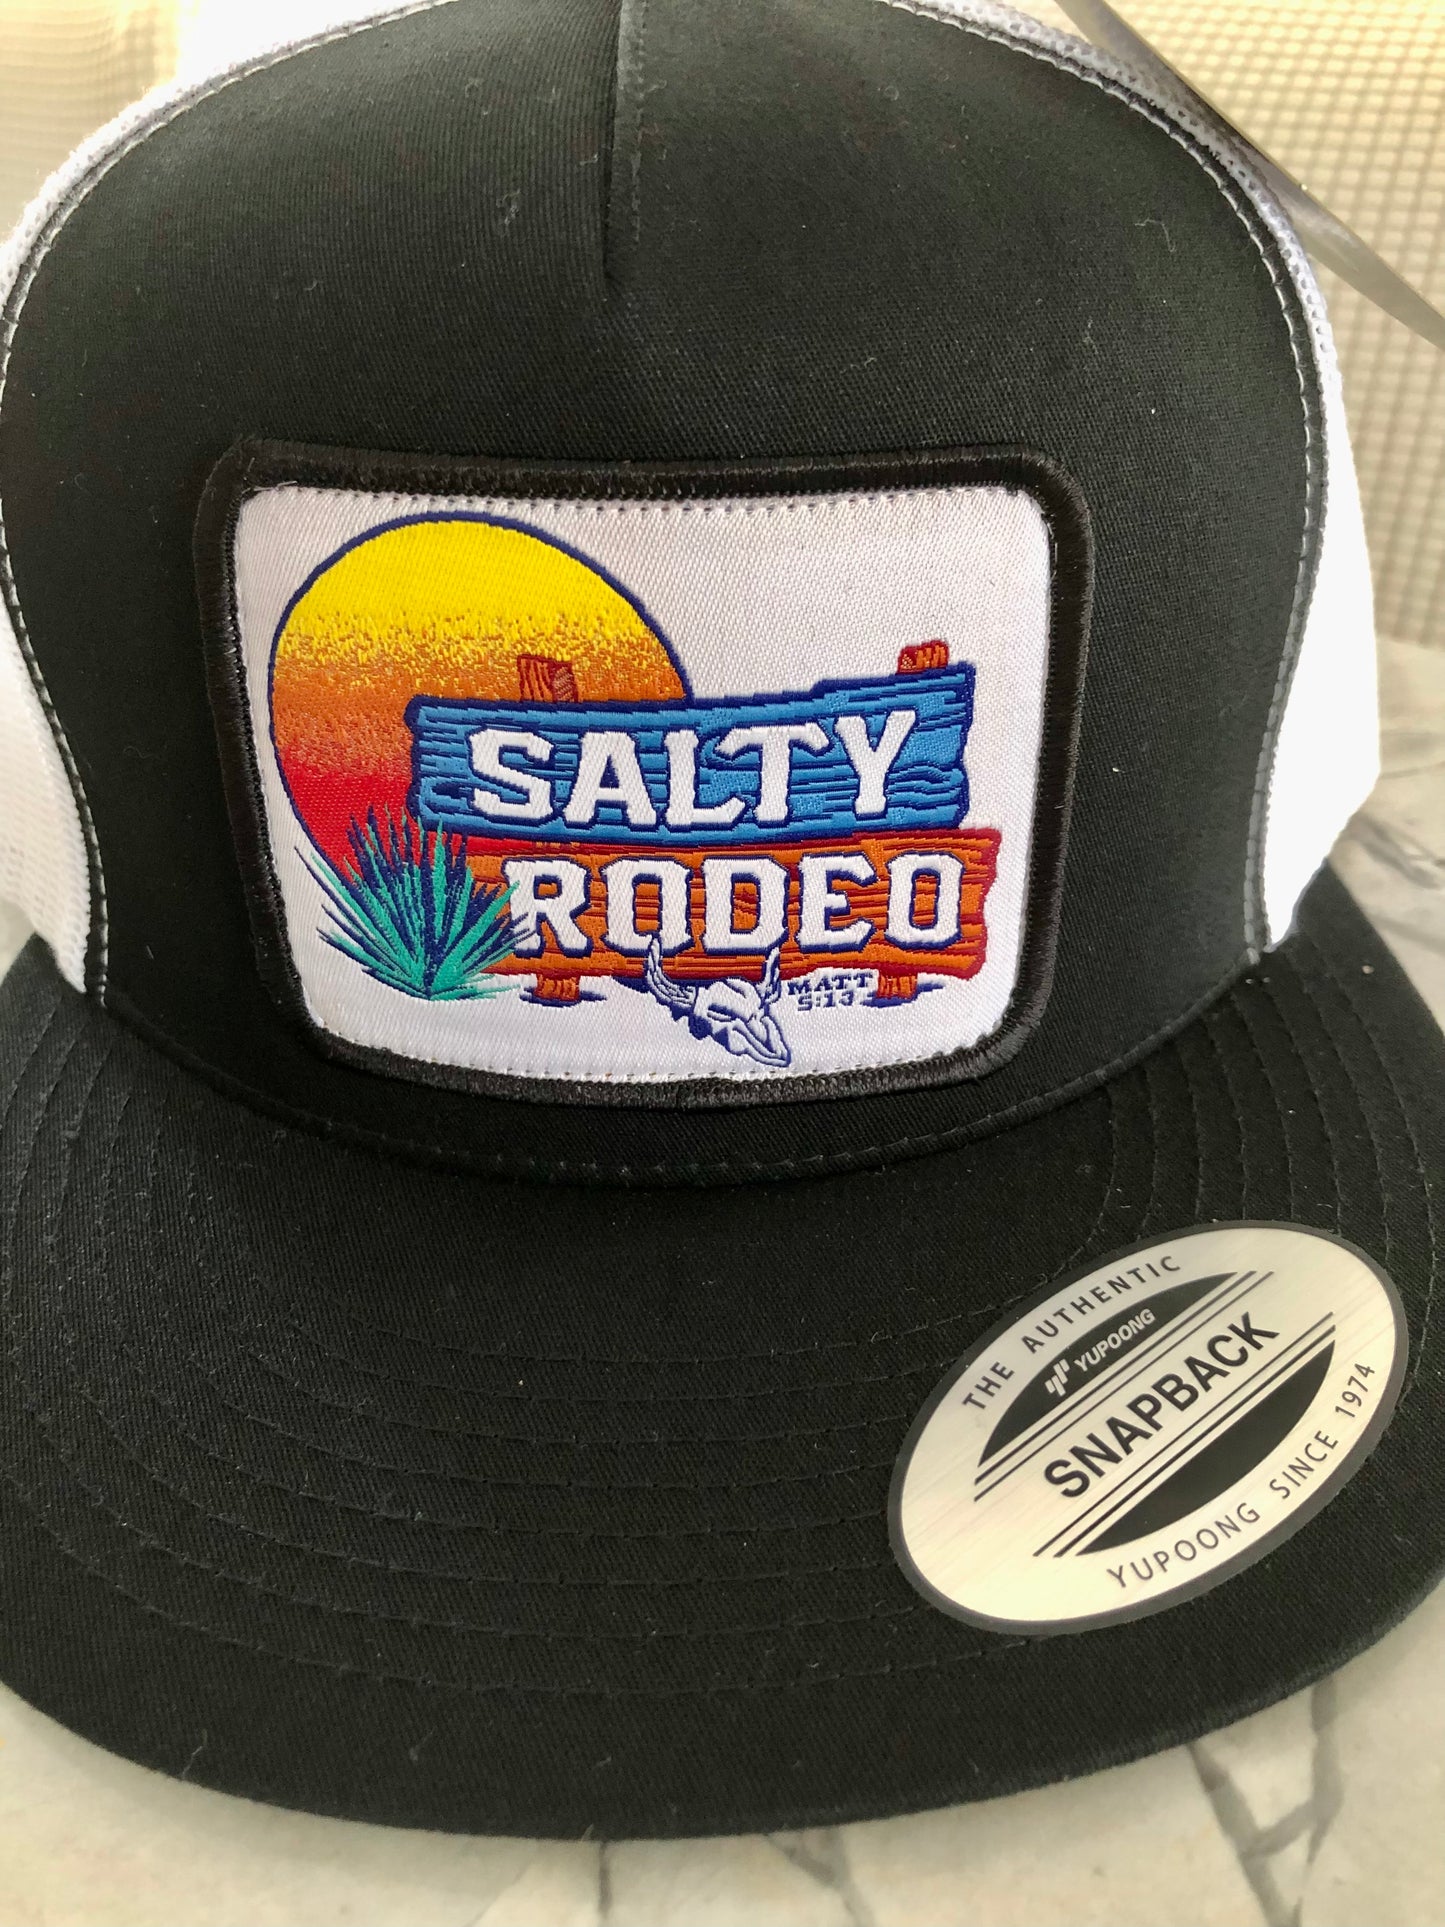 Salty Rodeo “post” hat